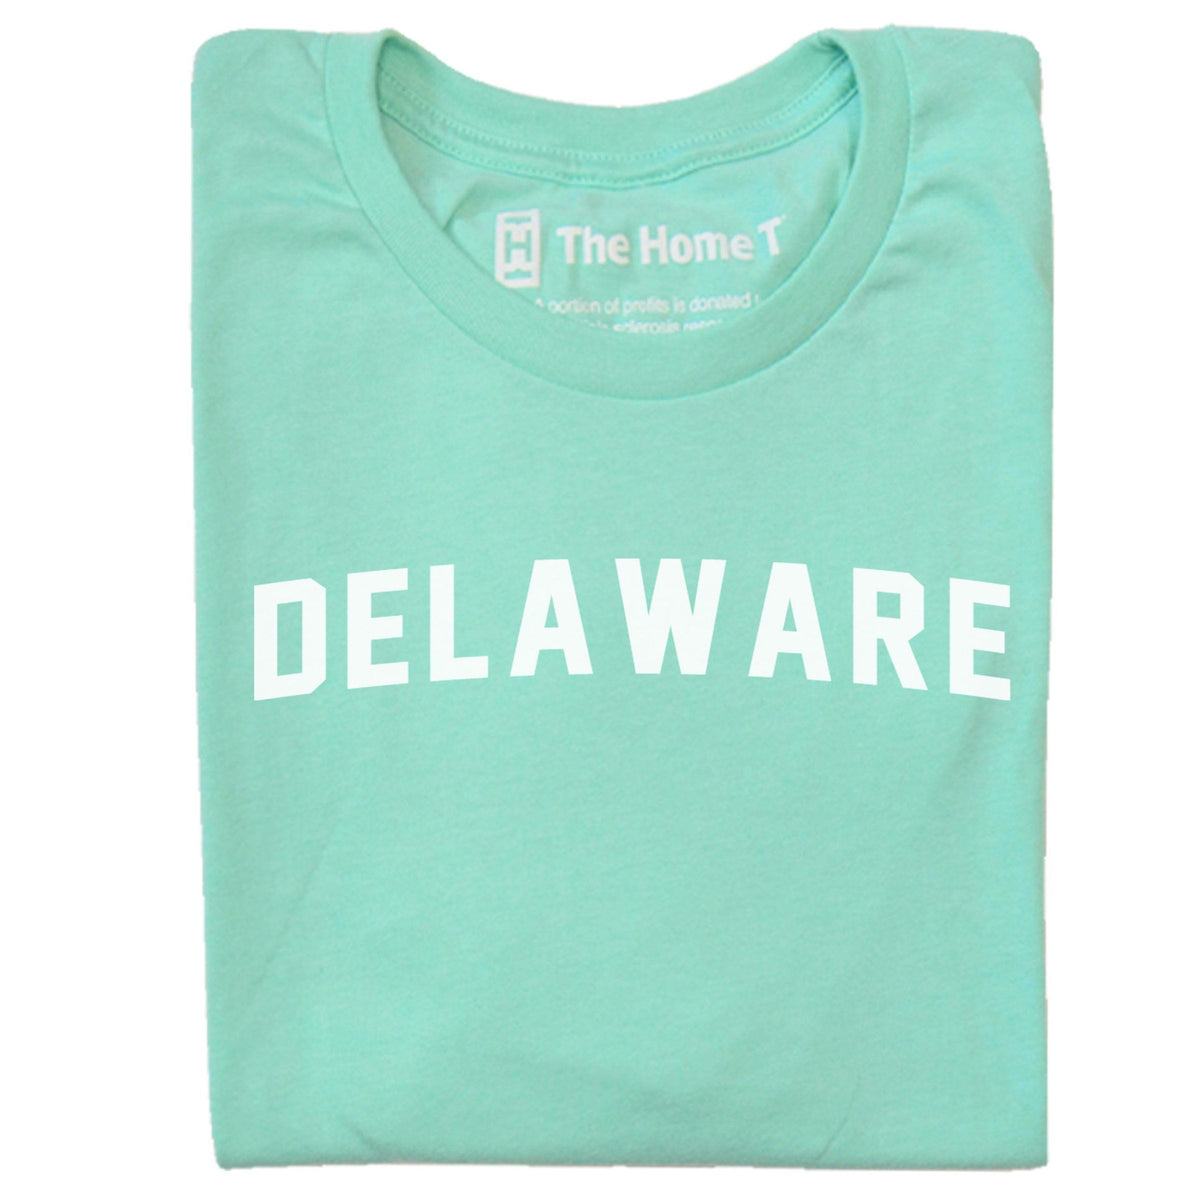 Delaware Arched The Home T XS Mint